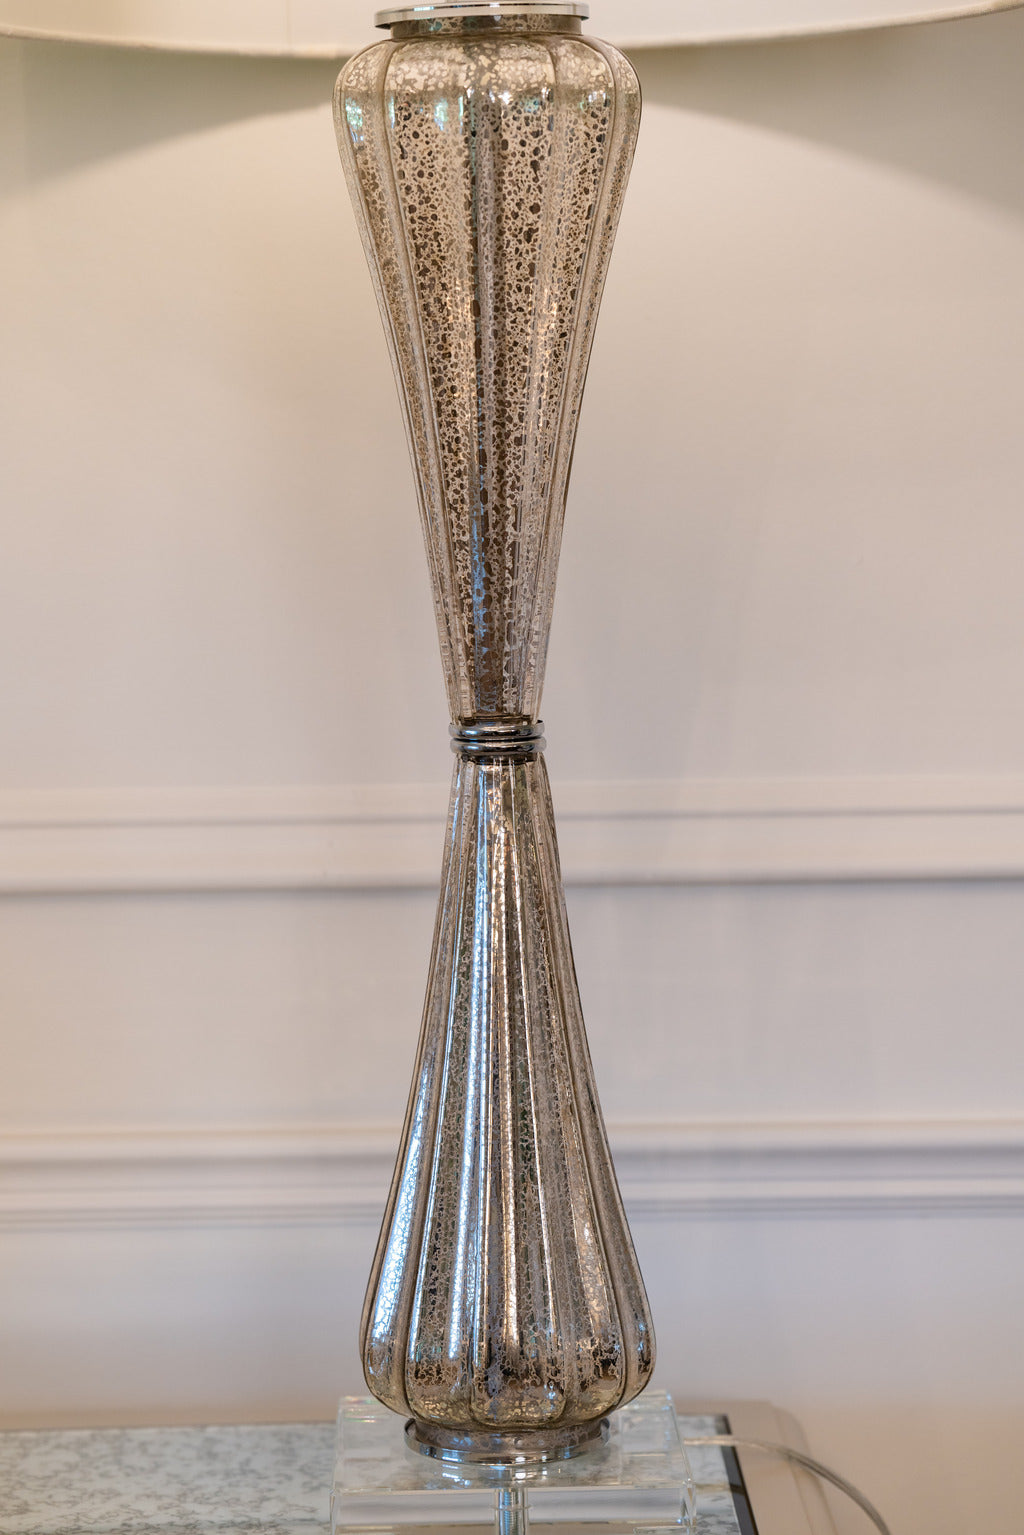 Silver table lamp, table lamp, Lamps, statement lamps, Lighting, Furniture, home decor